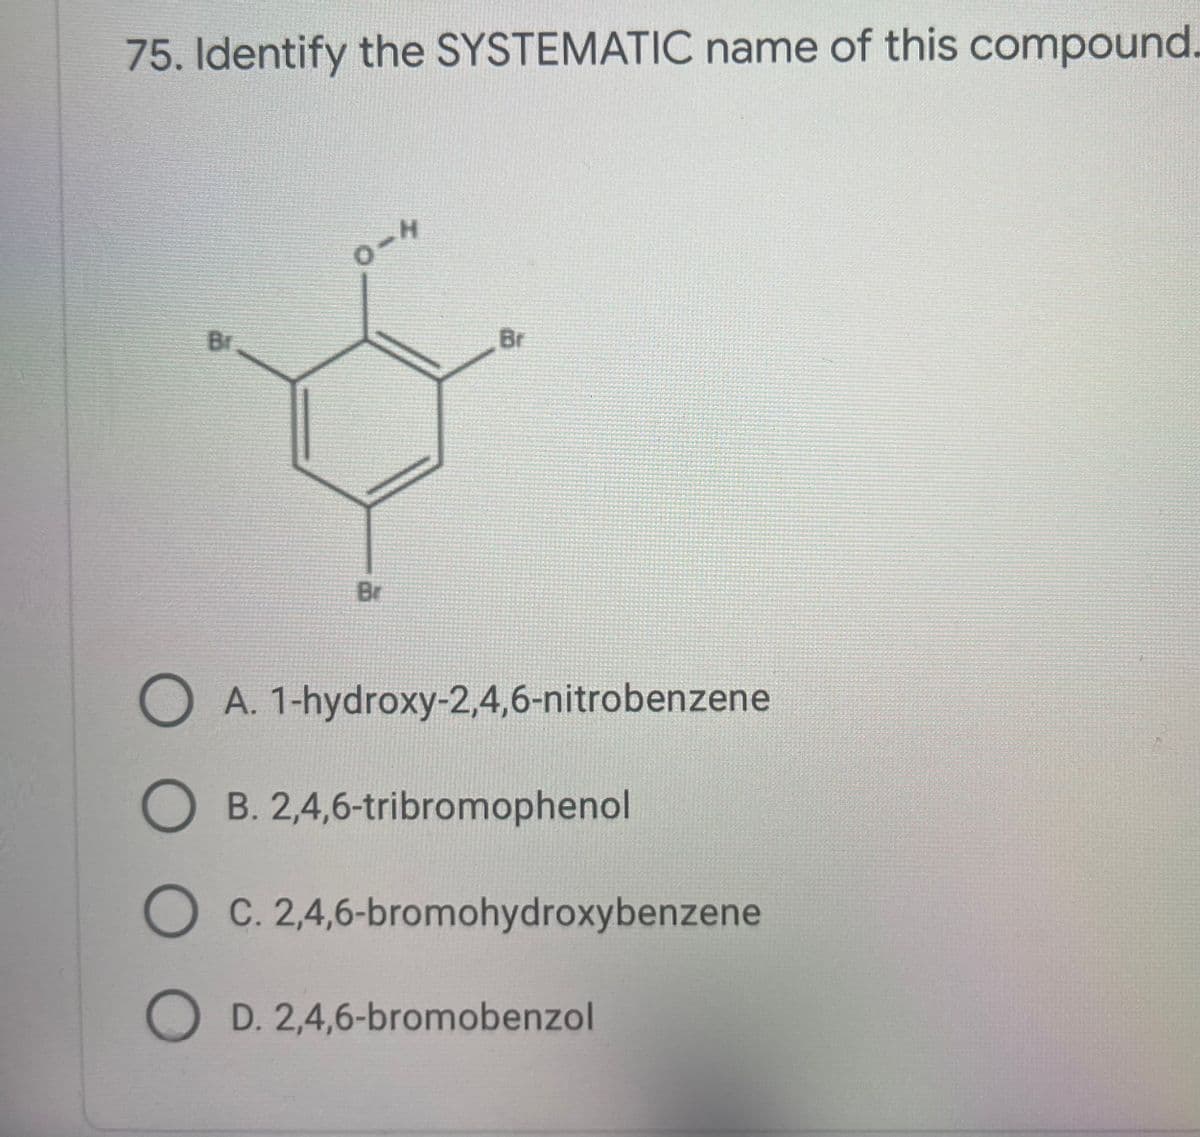 75. Identify the SYSTEMATIC name of this compound.
H.
Br
Br
Br
O A. 1-hydroxy-2,4,6-nitrobenzene
B. 2,4,6-tribromophenol
O C. 2,4,6-bromohydroxybenzene
O D. 2,4,6-bromobenzol
